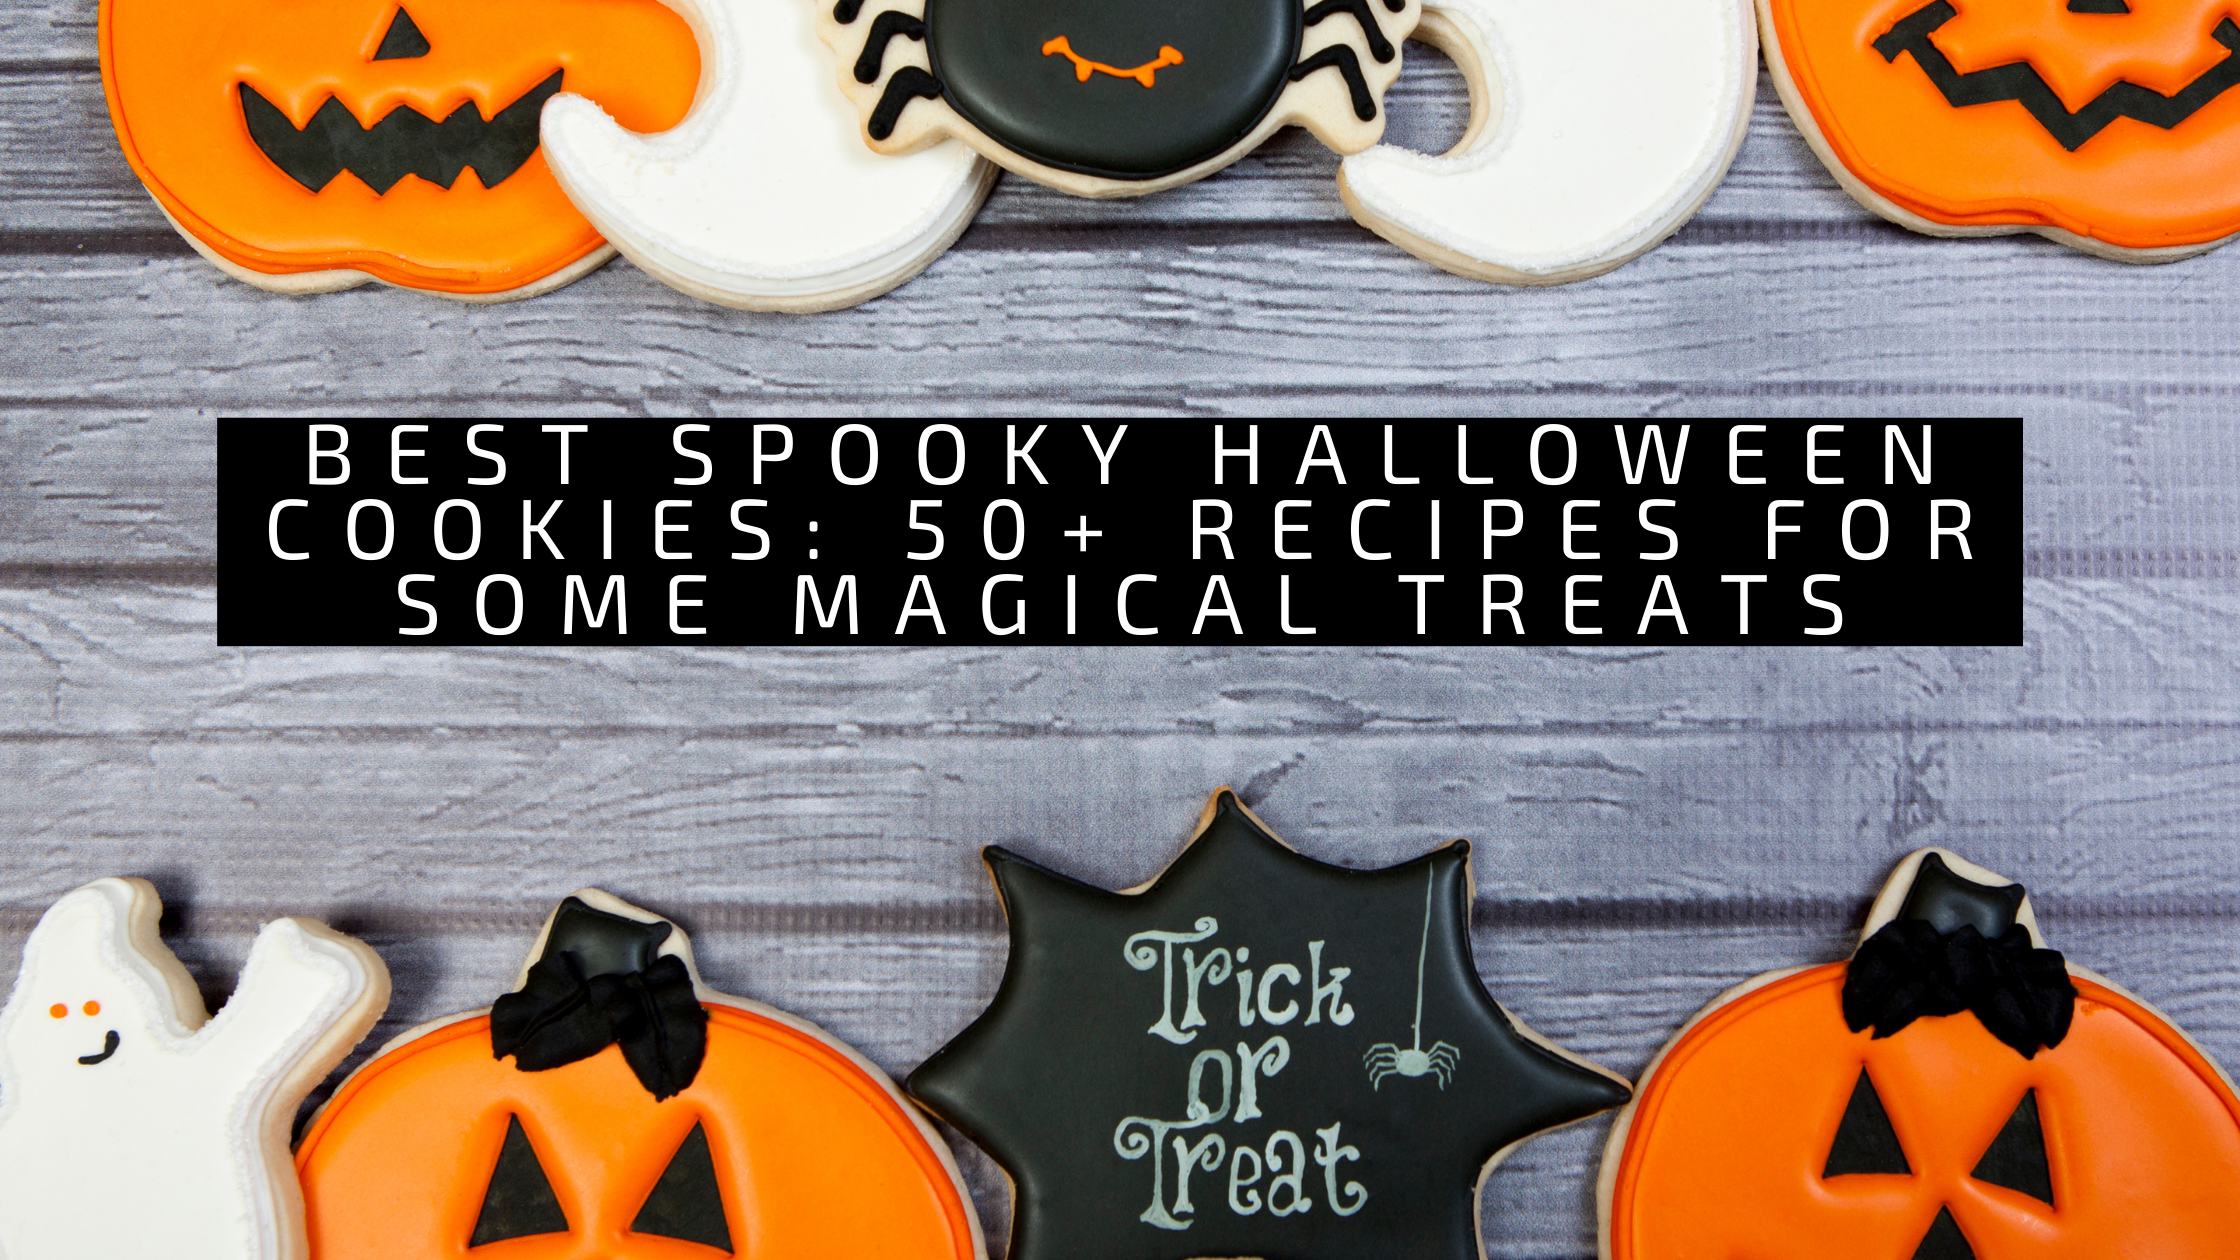 Best Spooky Halloween Cookies: 50+ Recipes for Some Magical Treats 108